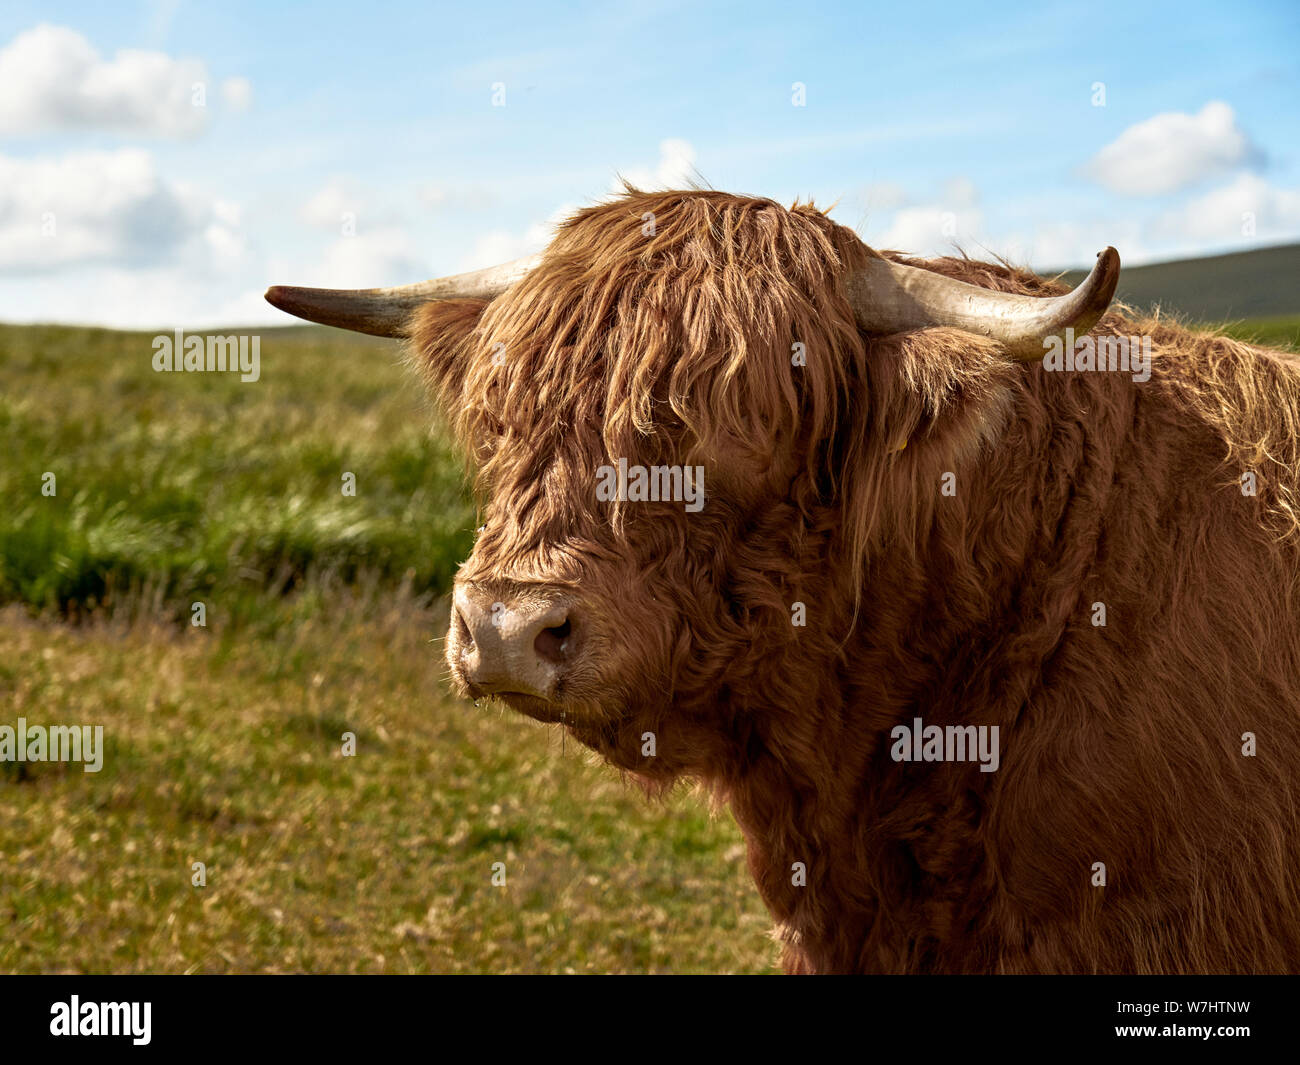 Highland cow standing proud Stock Photo